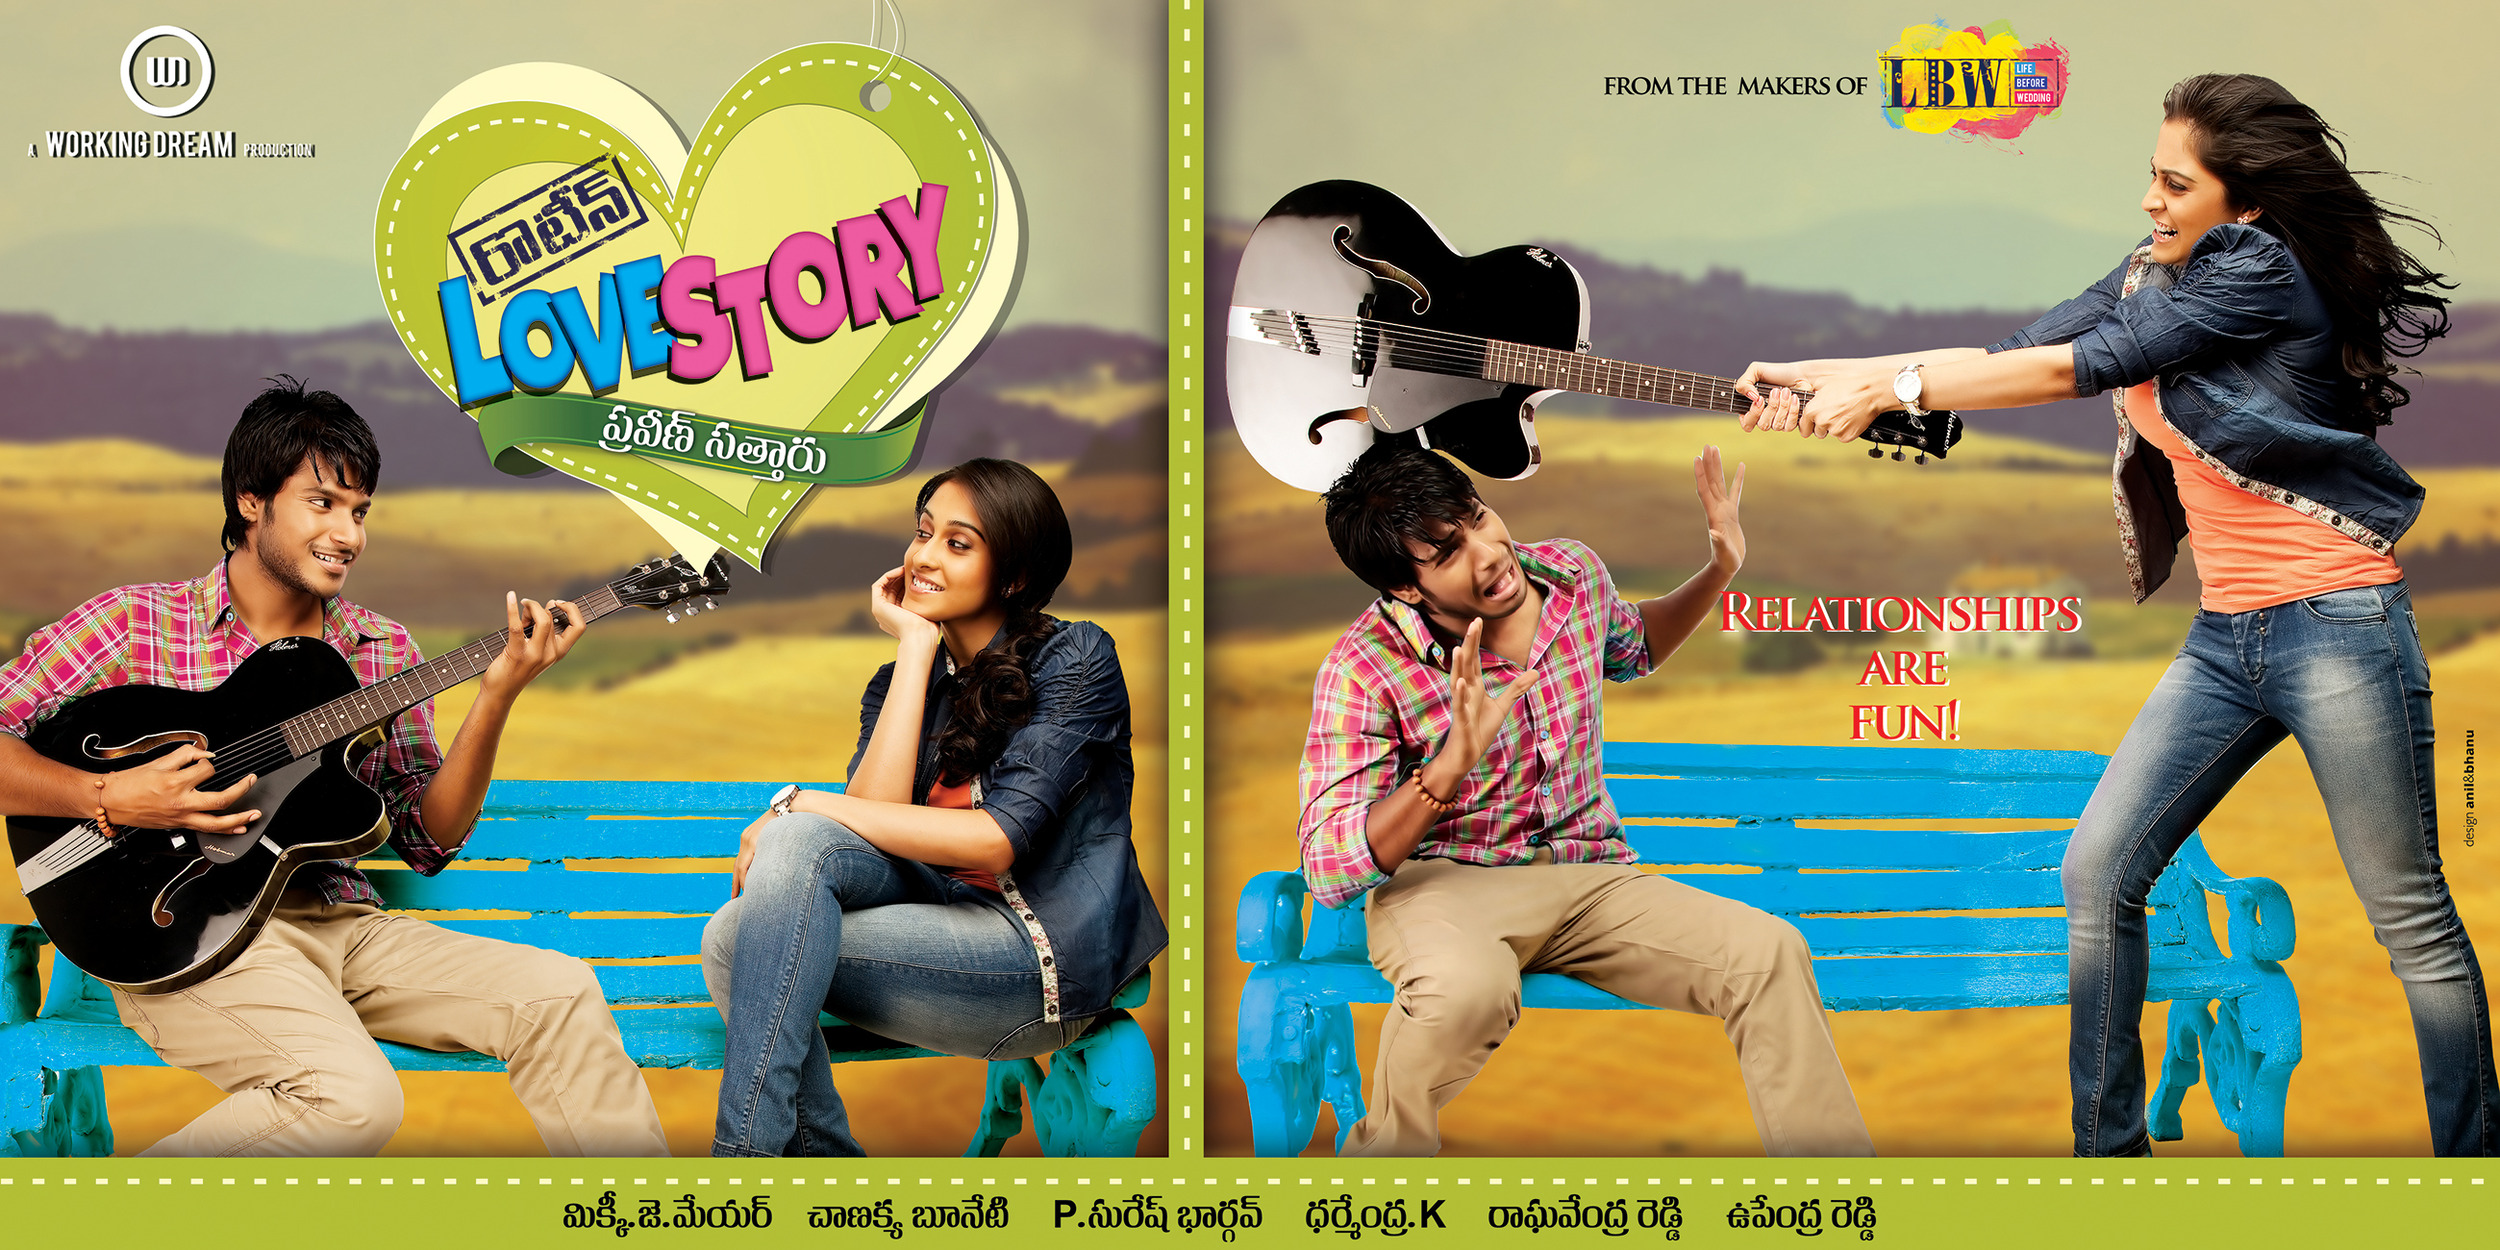 Mega Sized Movie Poster Image for Routine Love Story (#15 of 16)